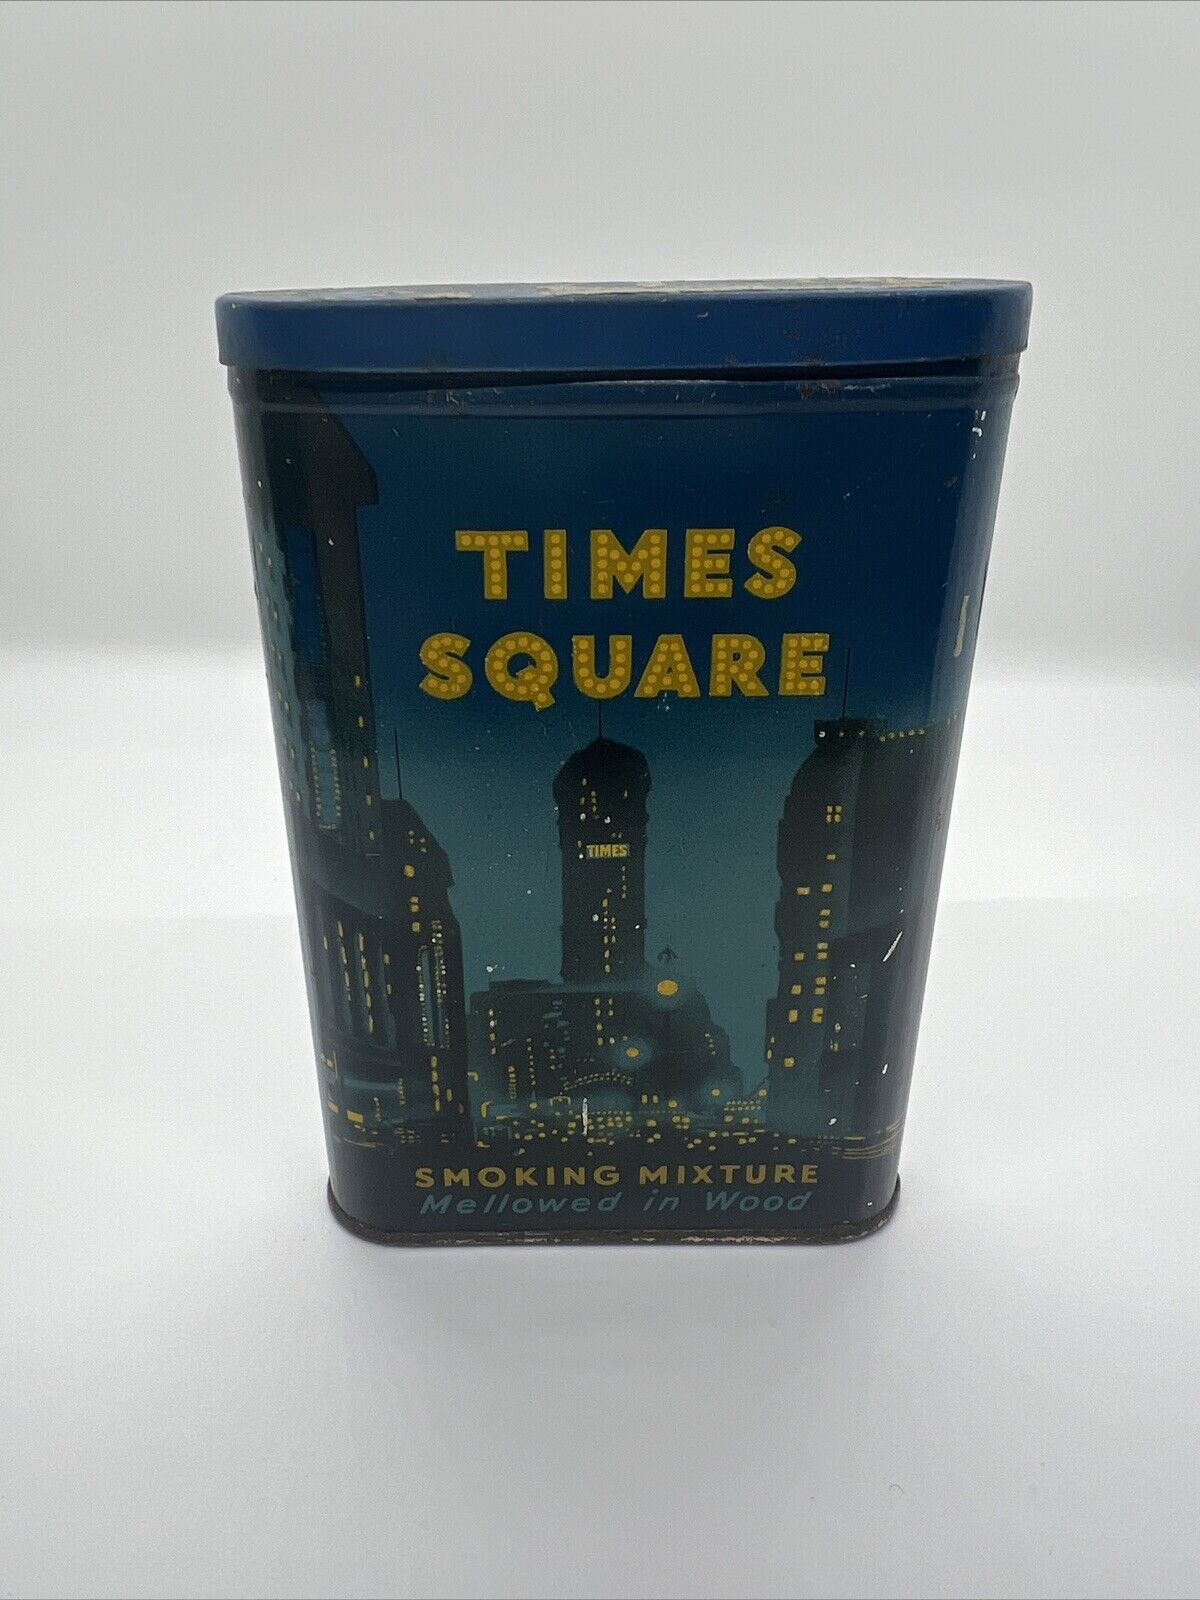 VINTAGE ADVERTISING  EMPTY TIMES SQUARE  VERTICAL POCKET TOBACCO TIN   126-M